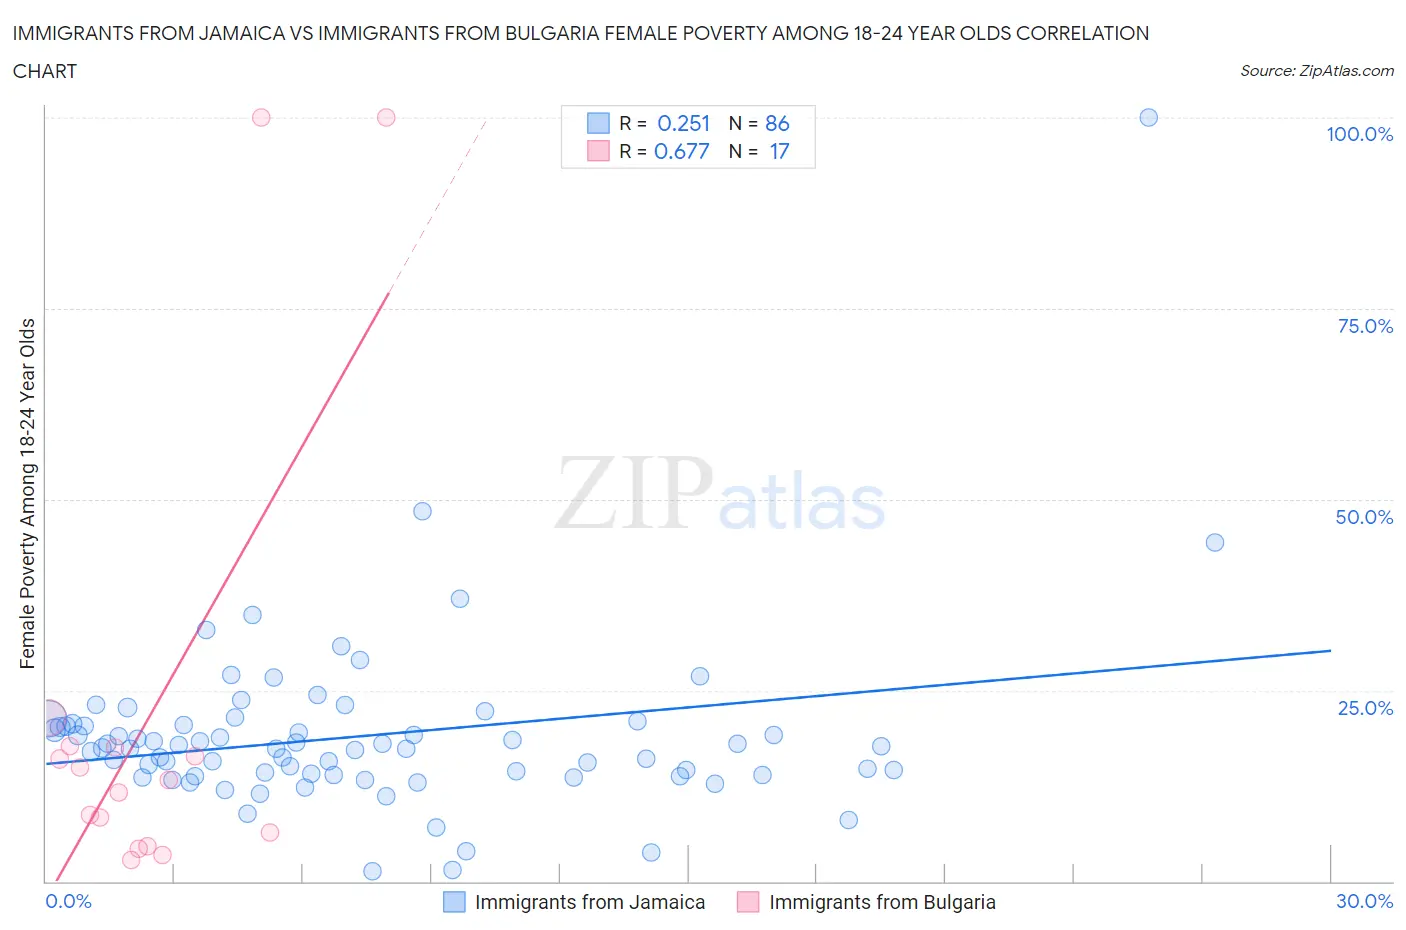 Immigrants from Jamaica vs Immigrants from Bulgaria Female Poverty Among 18-24 Year Olds